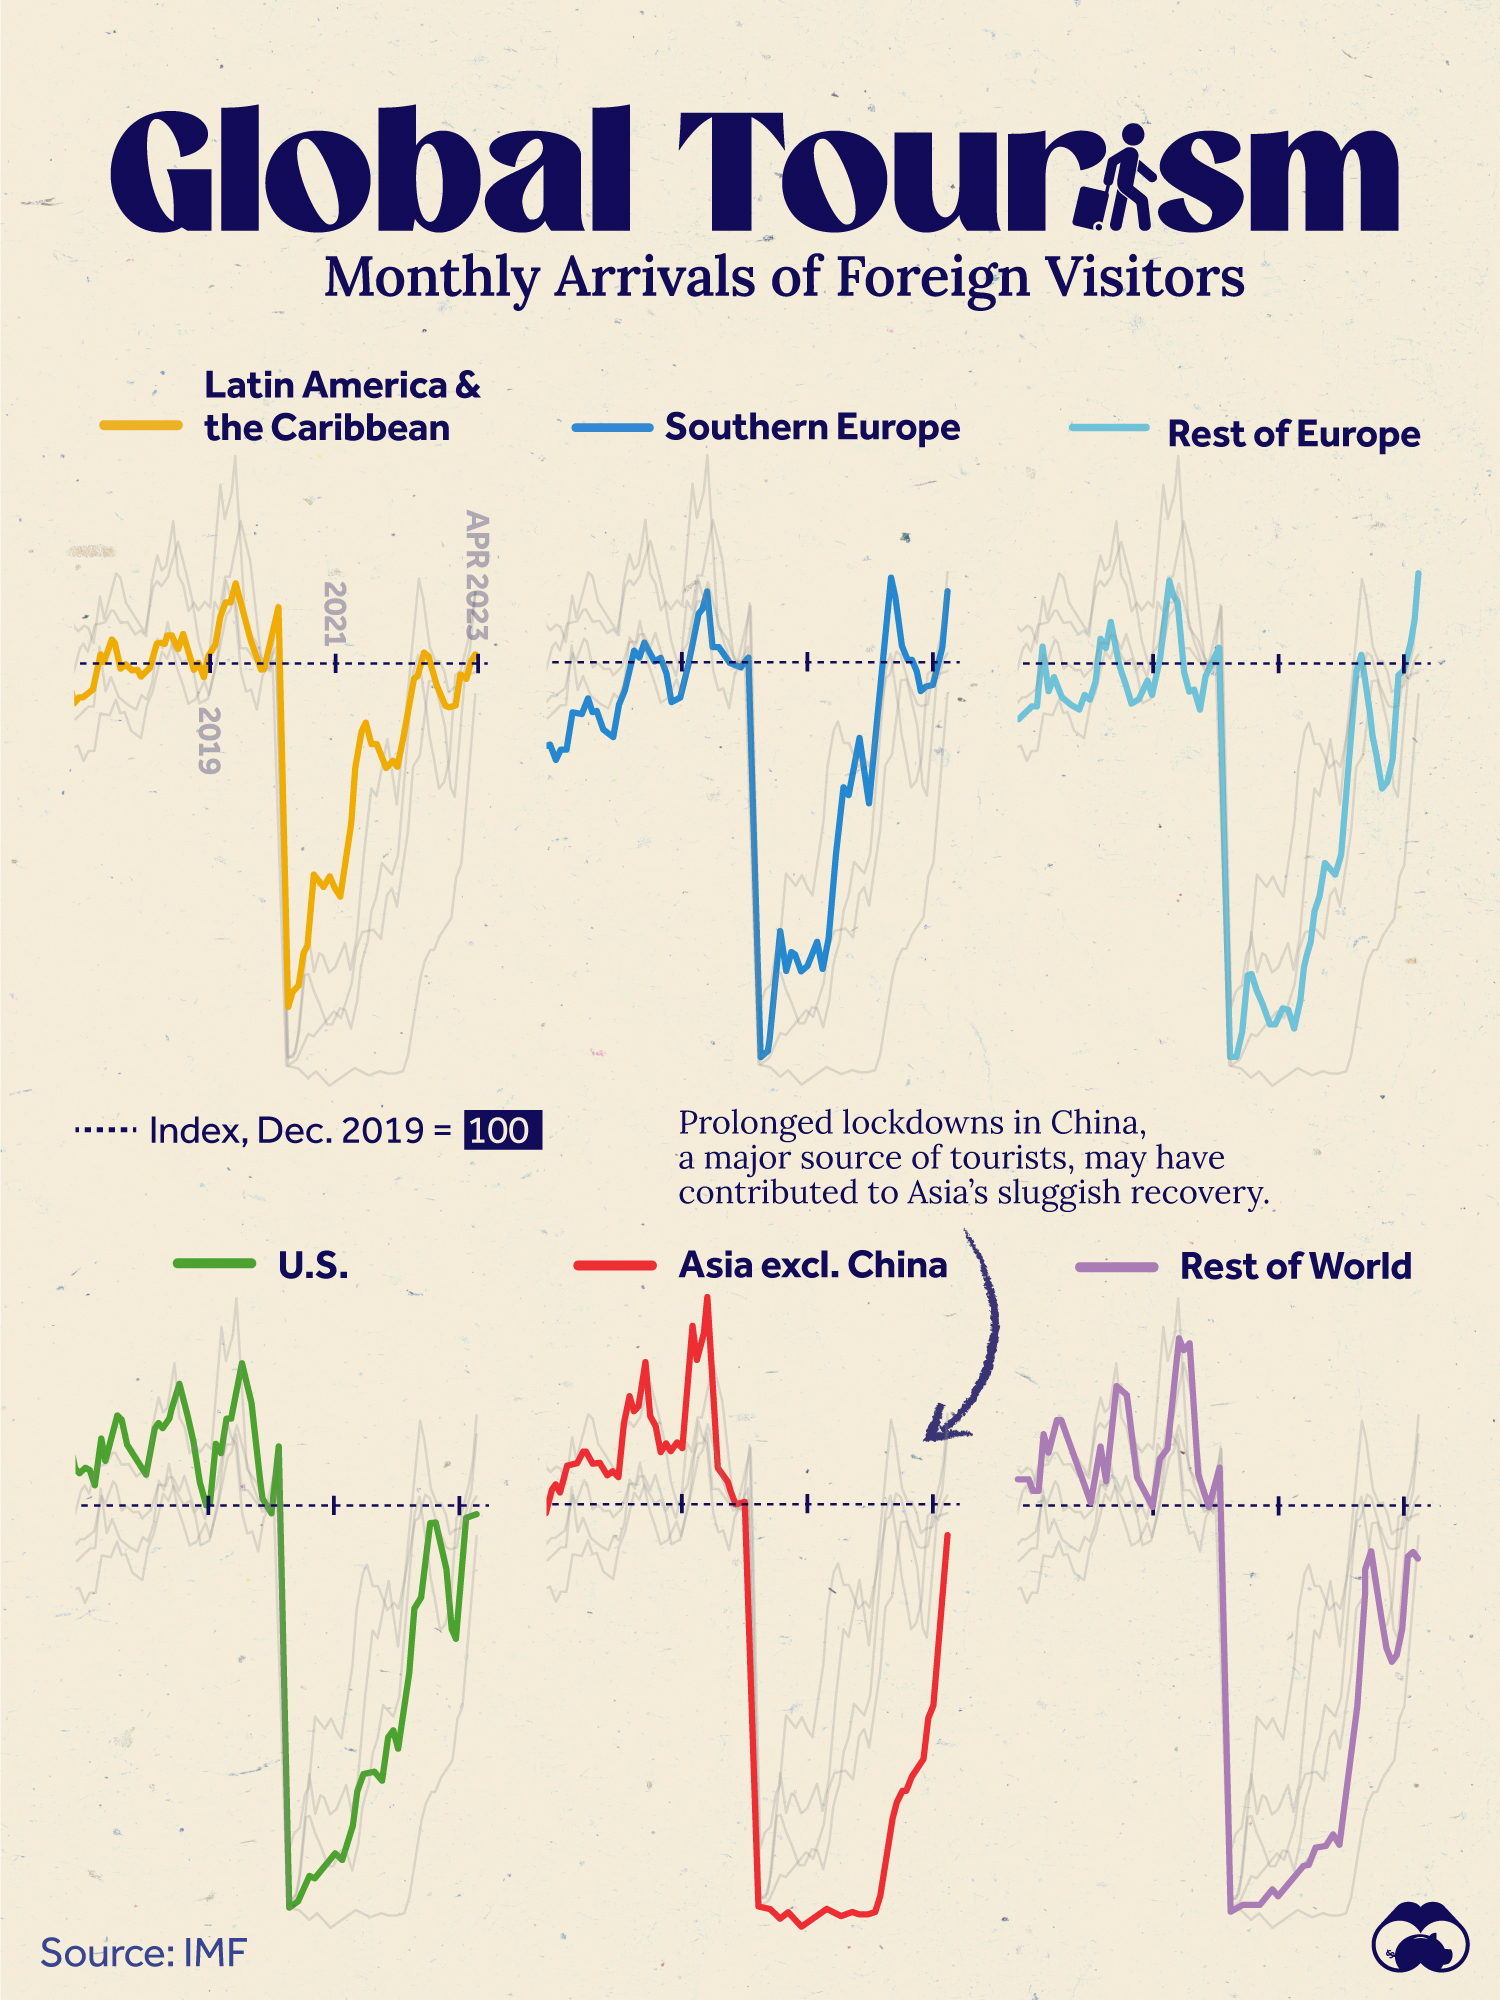 A time series chart showing the number of foreign visitors across regions, indexed to December 2019 levels, indicating global tourism has rebounded.